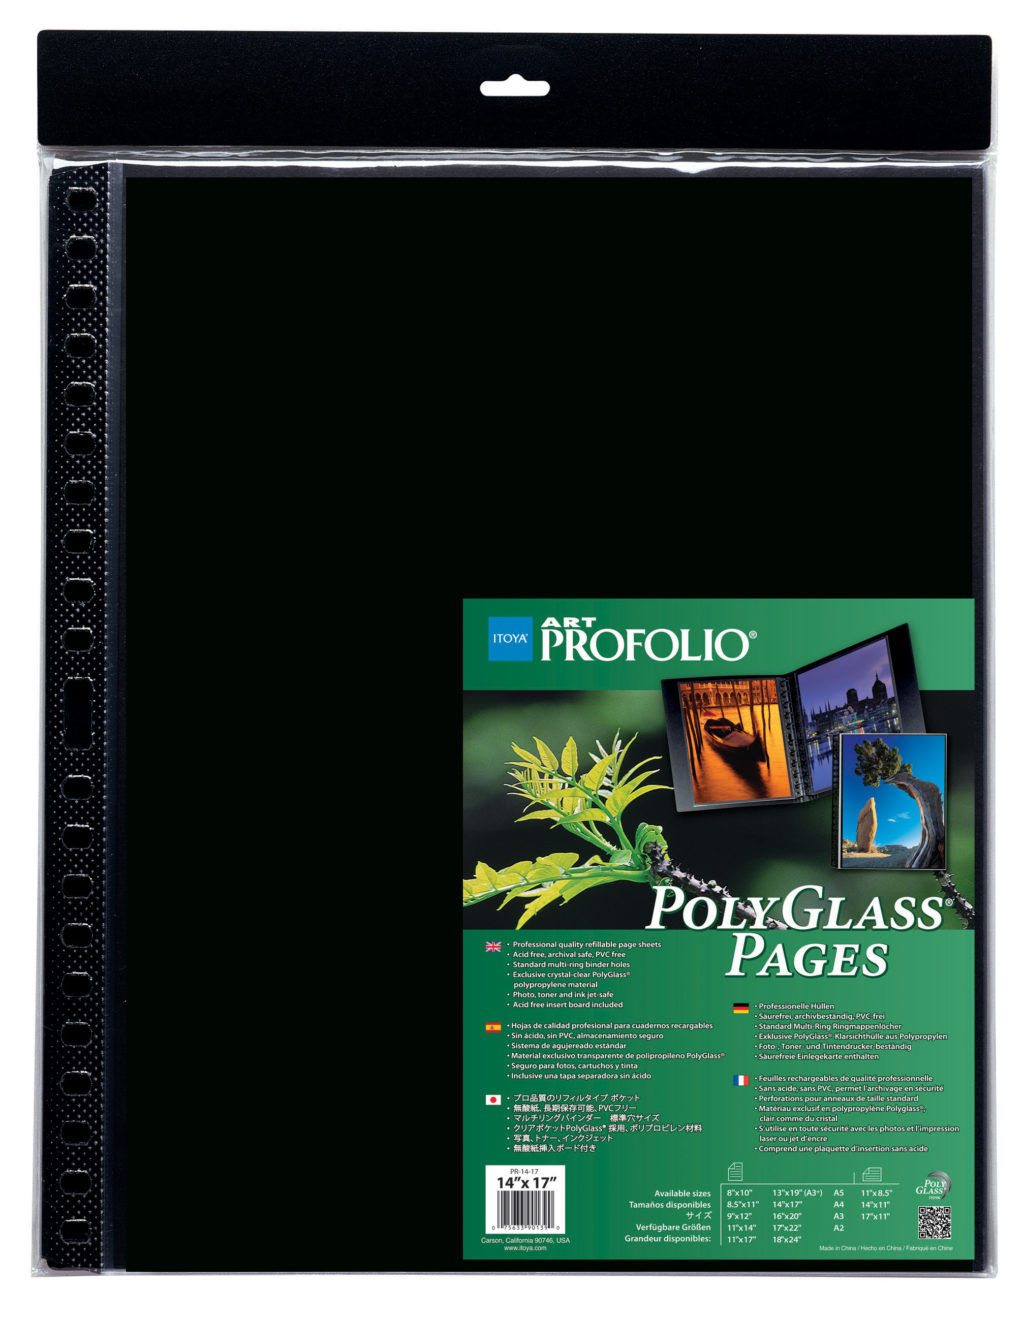 Itoya ProFolio PolyGlass Pages (Portrait, 18 x 24, 10 Pages)